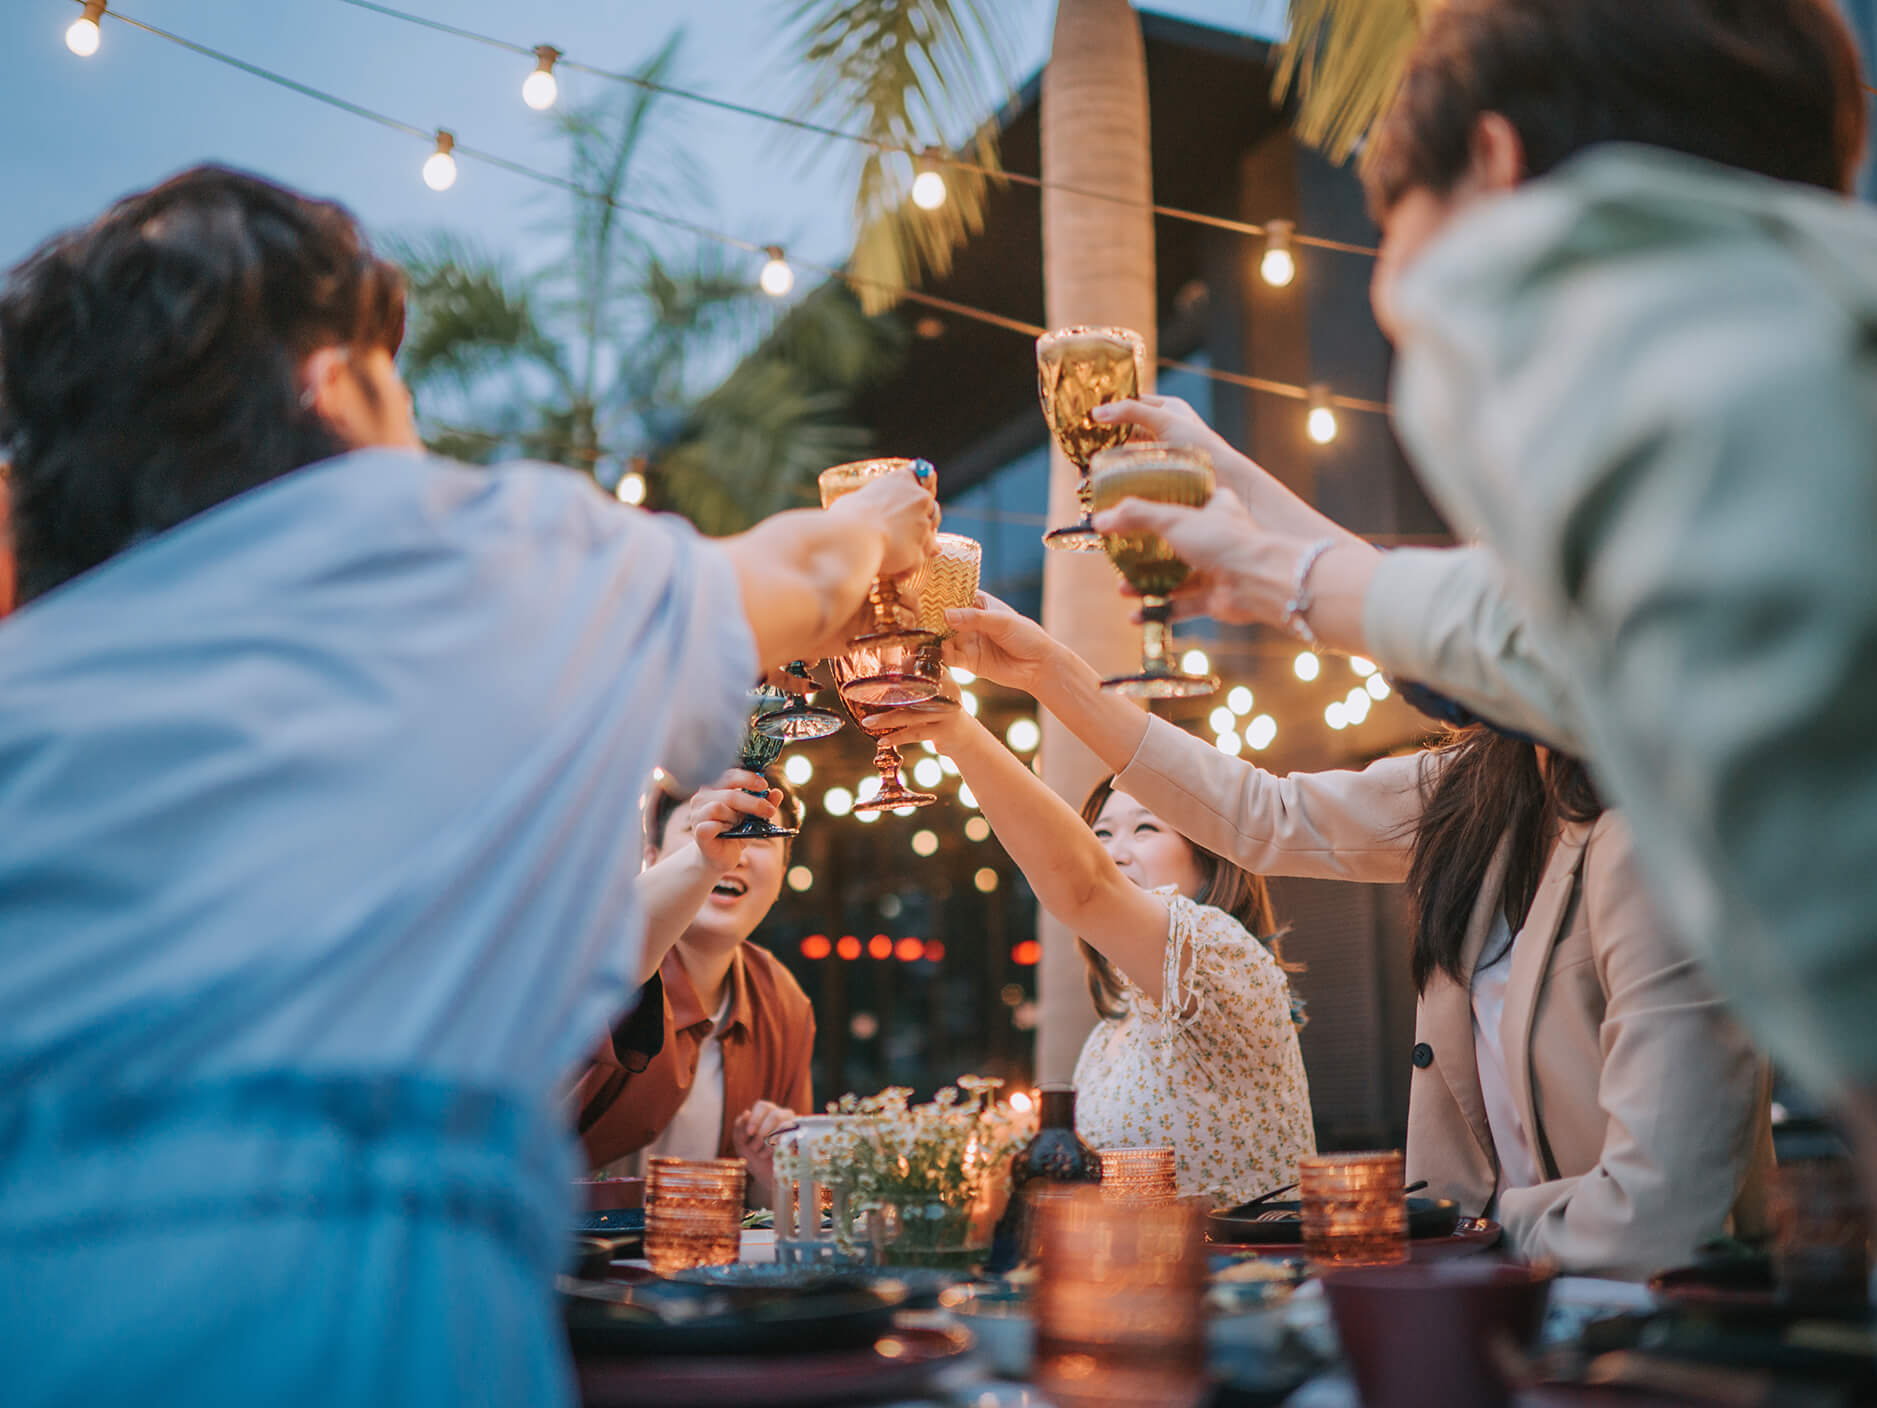 How to start party rental business in 2023